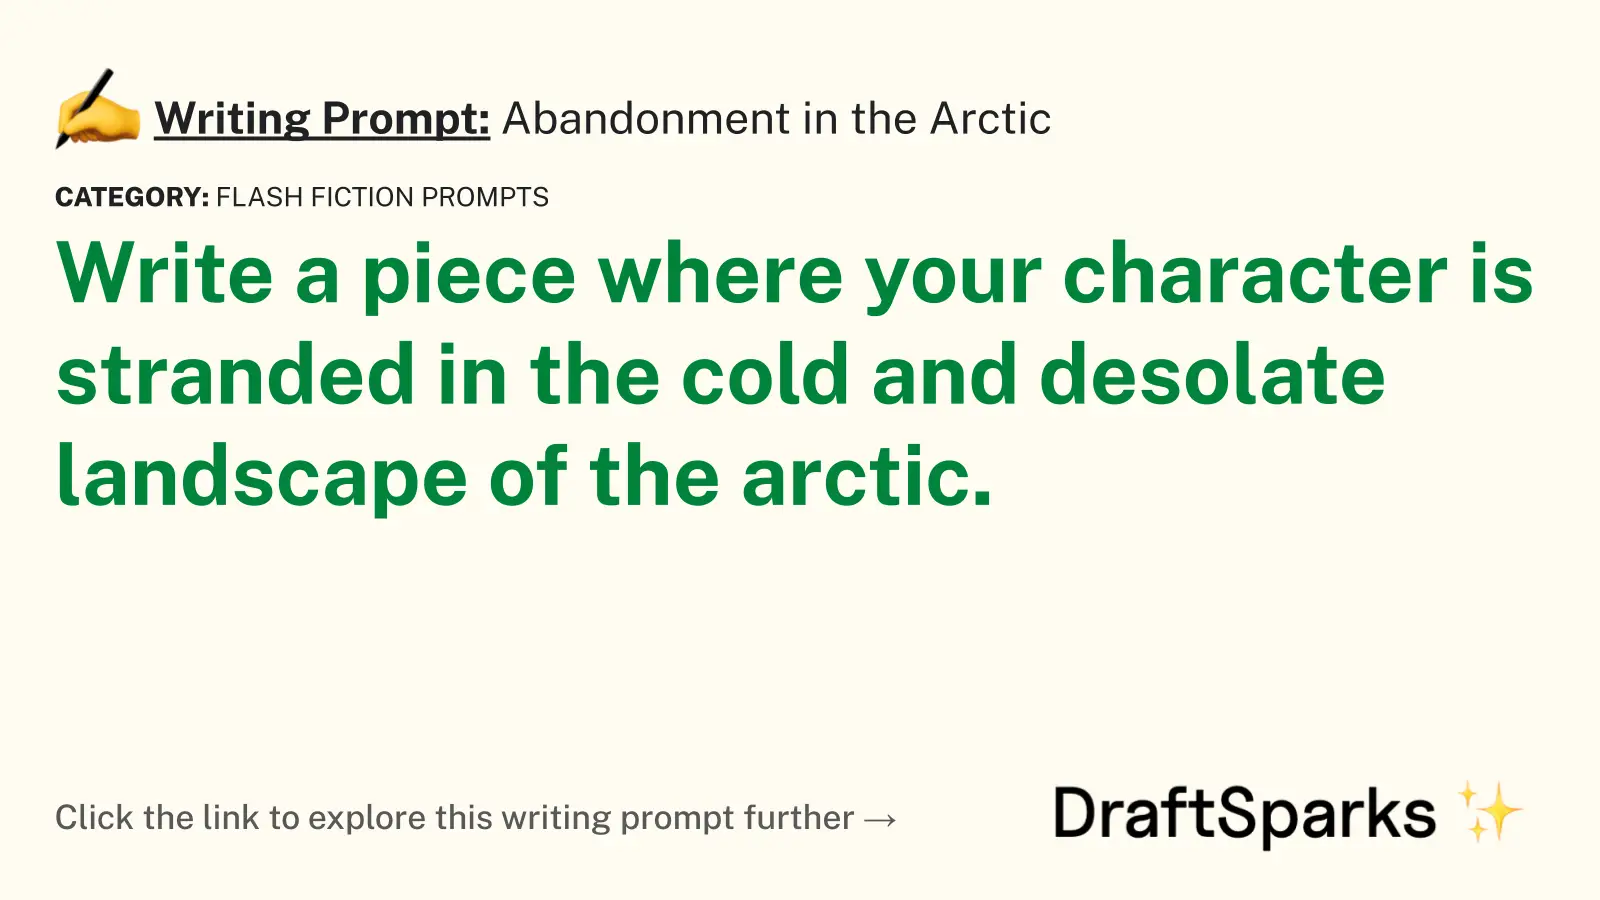 Abandonment in the Arctic